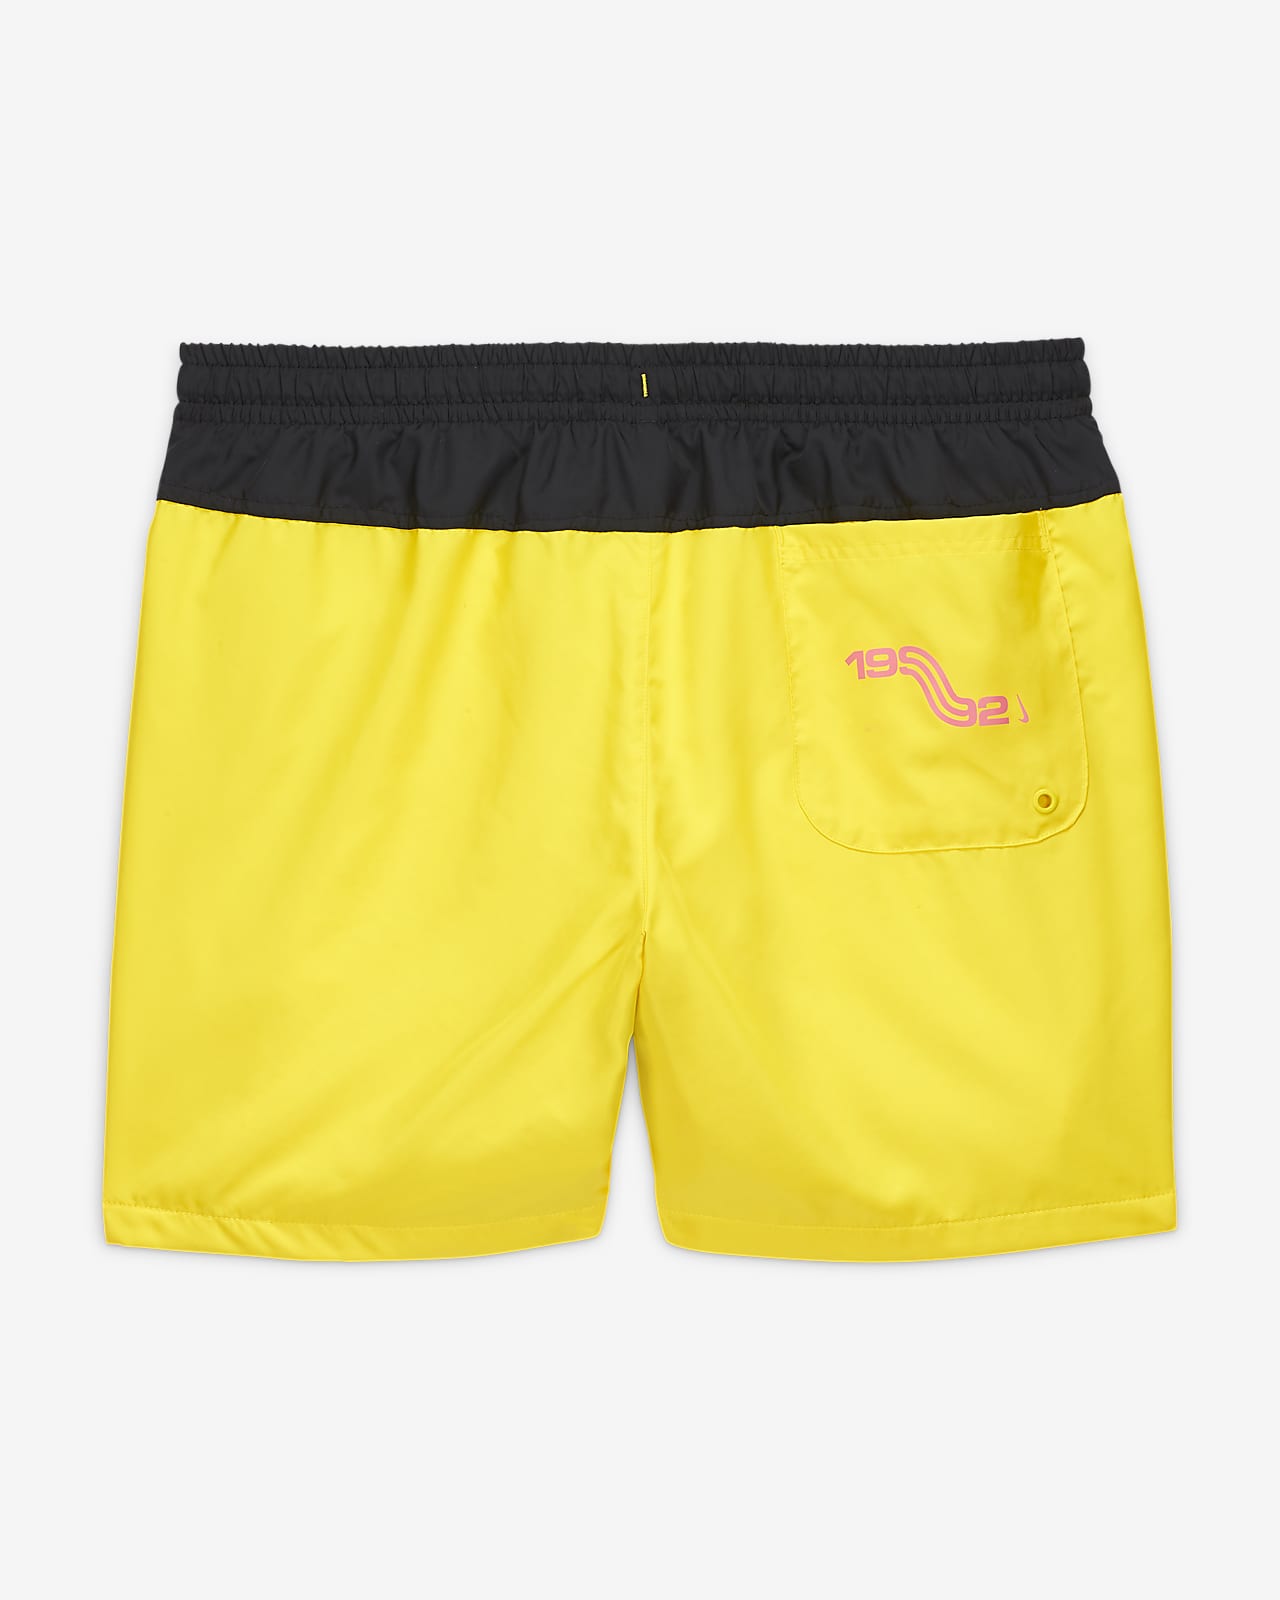 kyrie 90s shorts